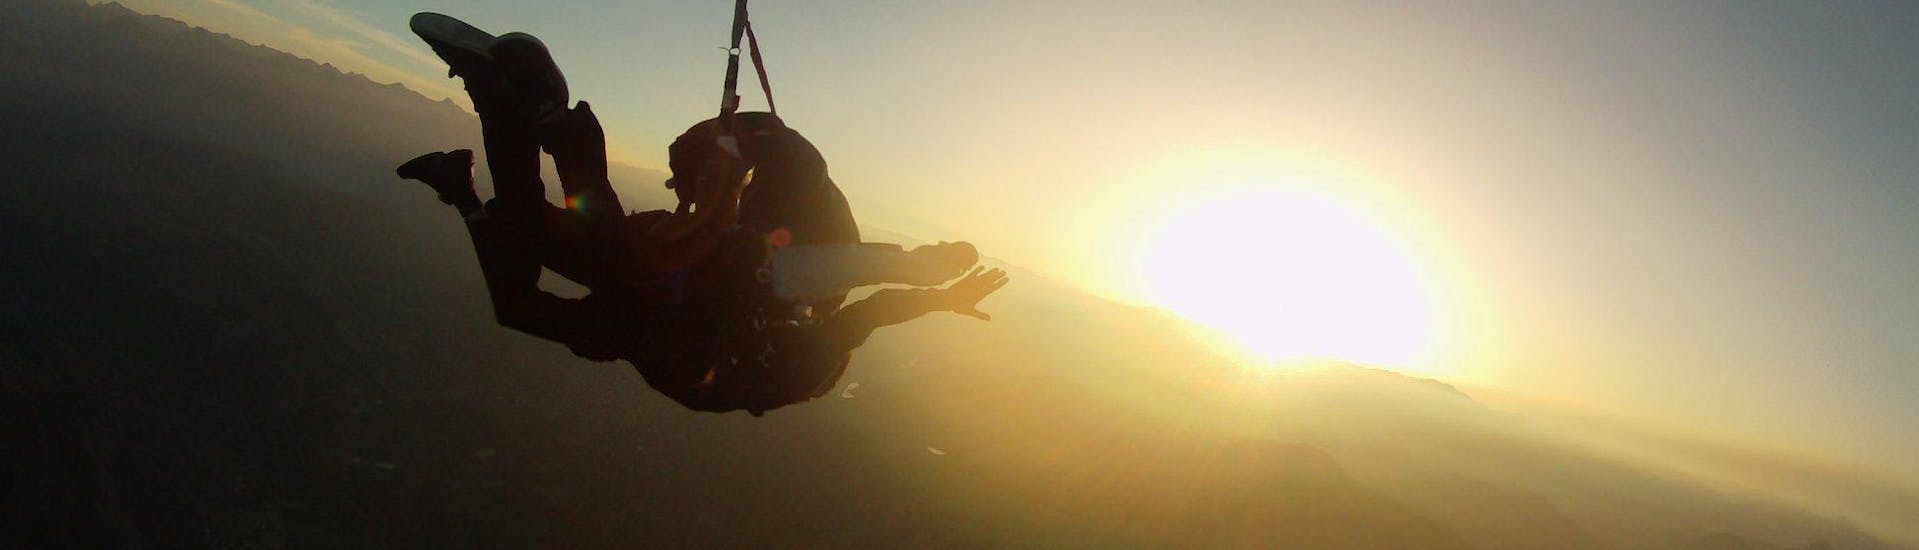 A tandem master from Skydive Center has jumped with a passenger off the plane at an altitude of 4000m in Gap-Tallard under the sunset.